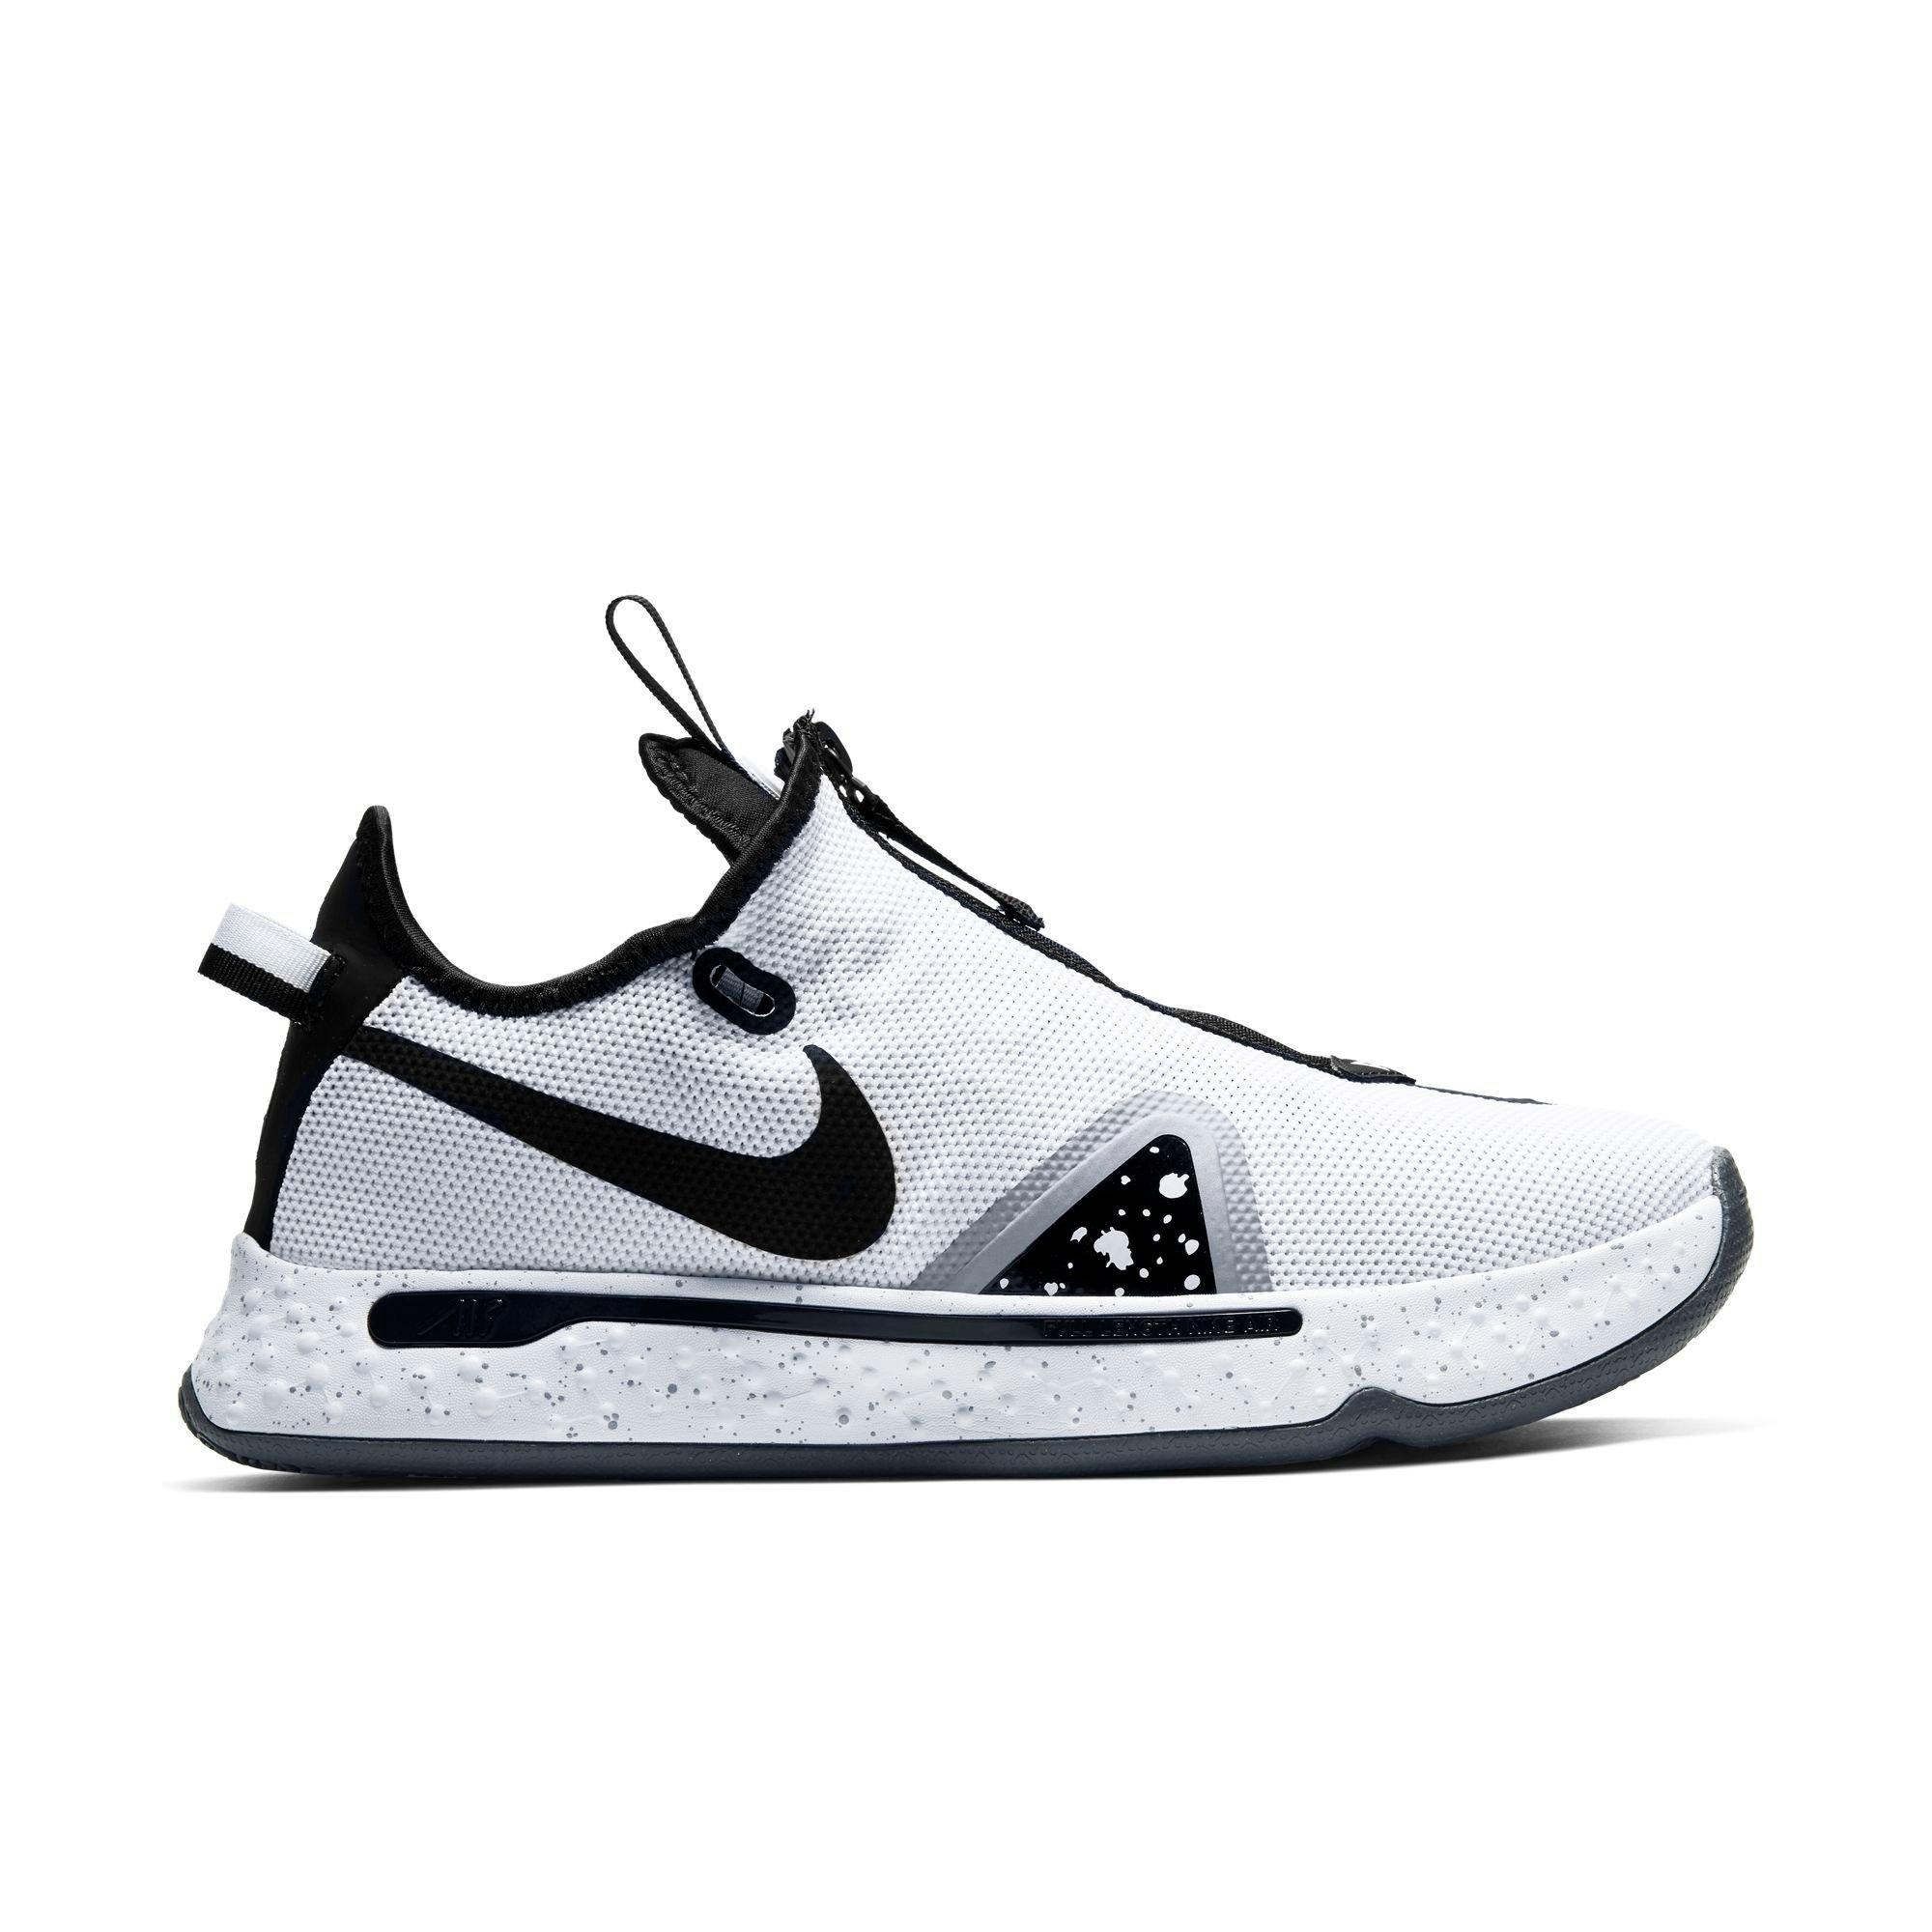 paul george shoes gray